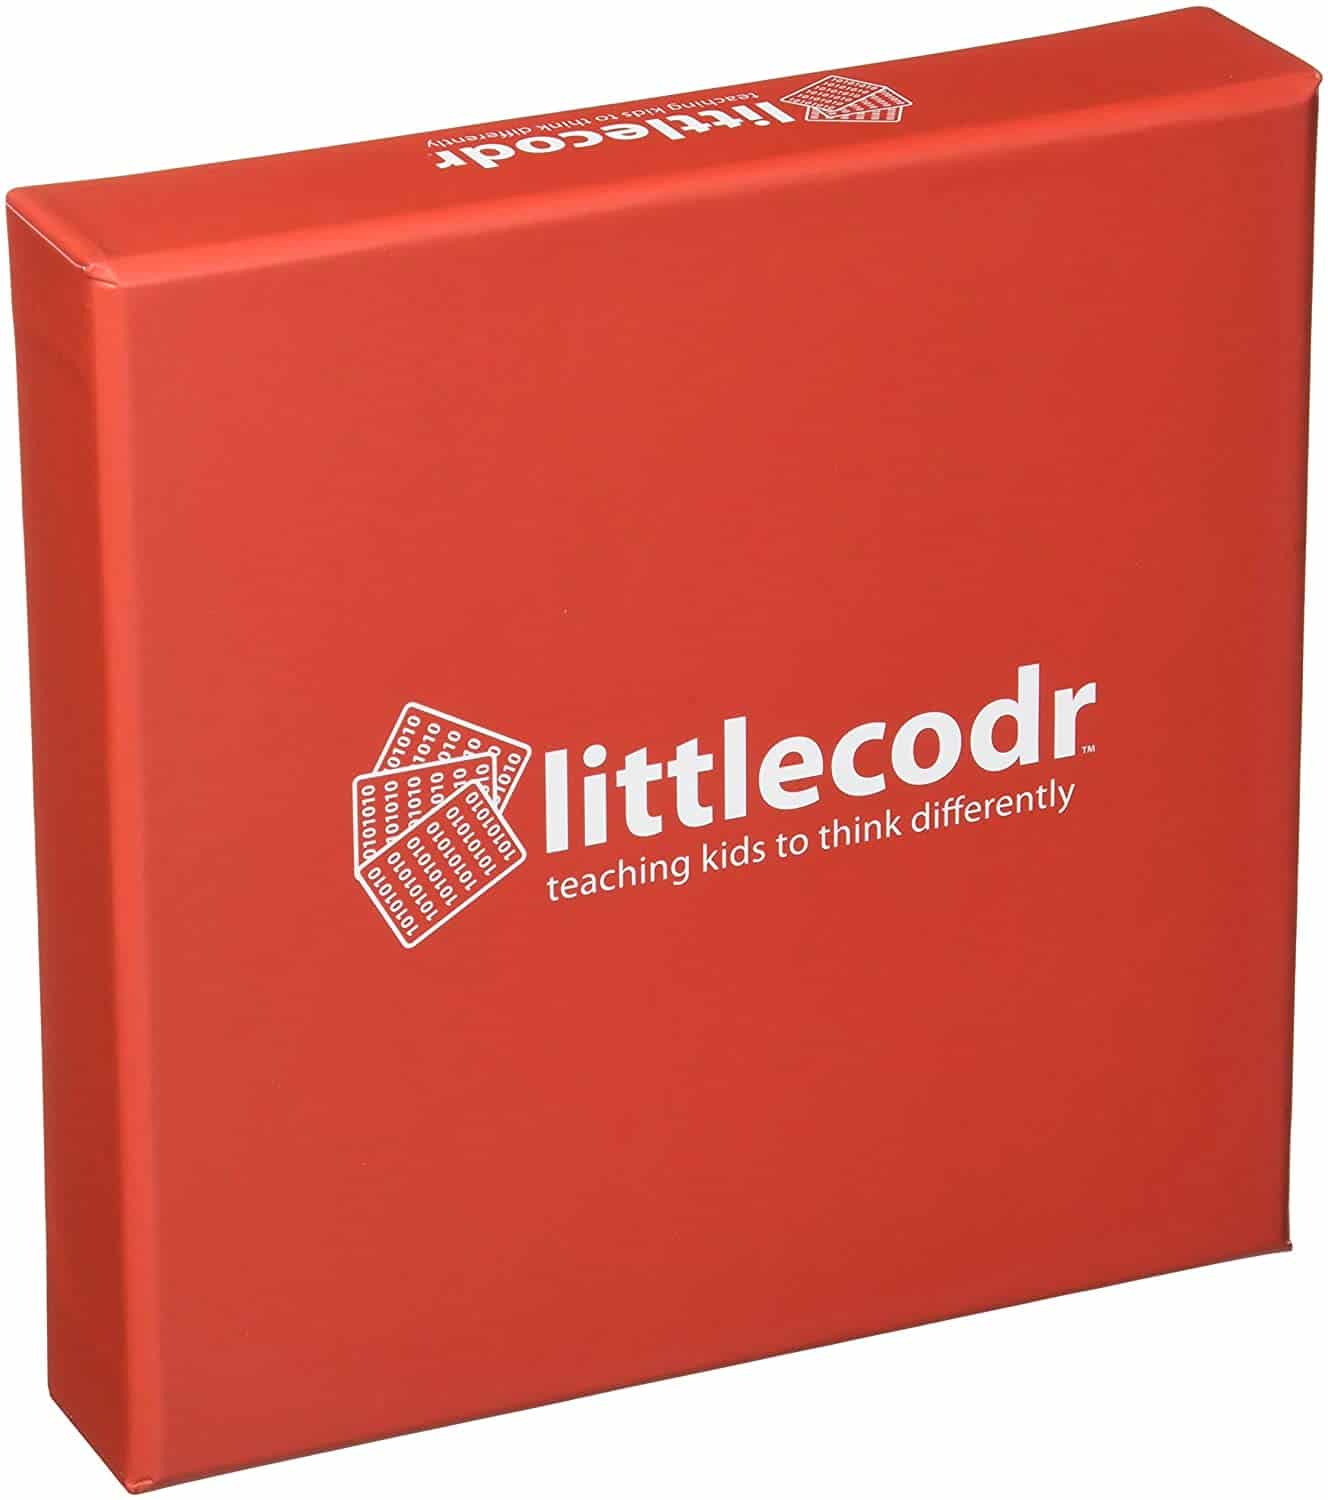 Most fun coding card game for toddlers: LittleCodr